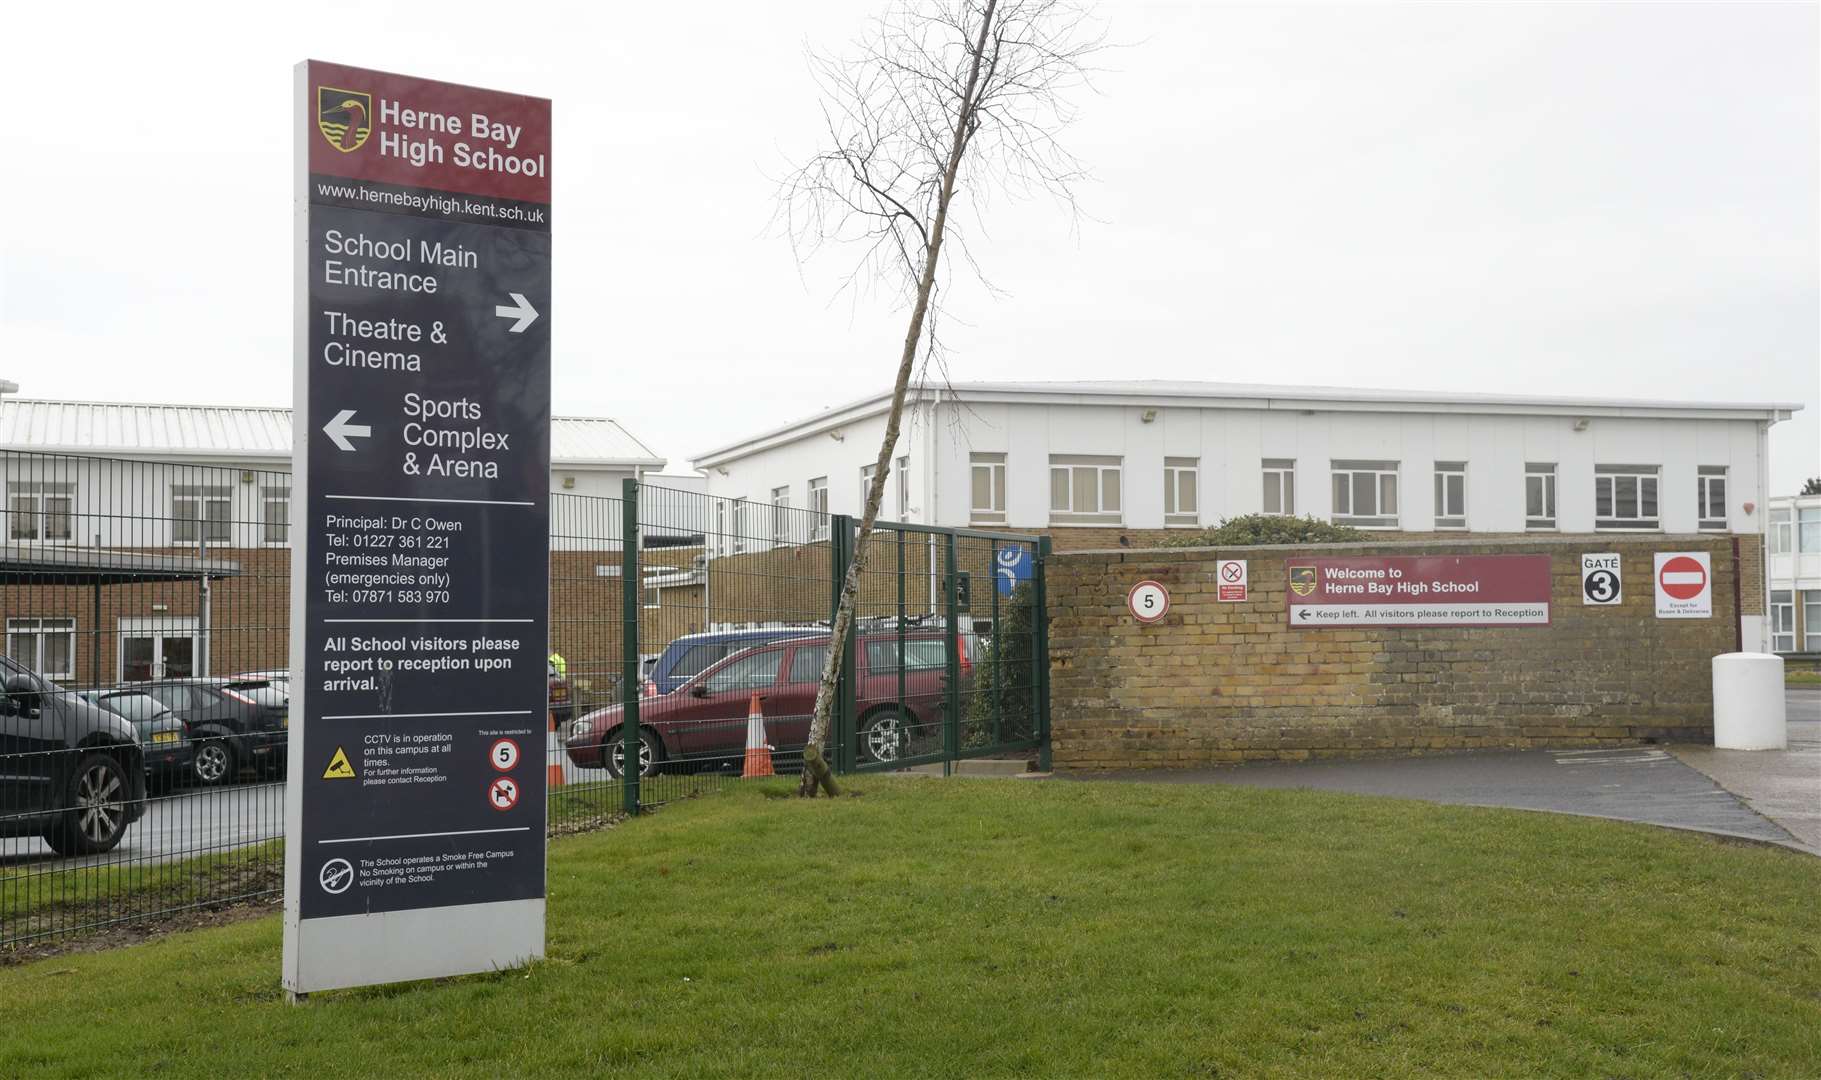 Herne Bay High is the only secondary school in the town